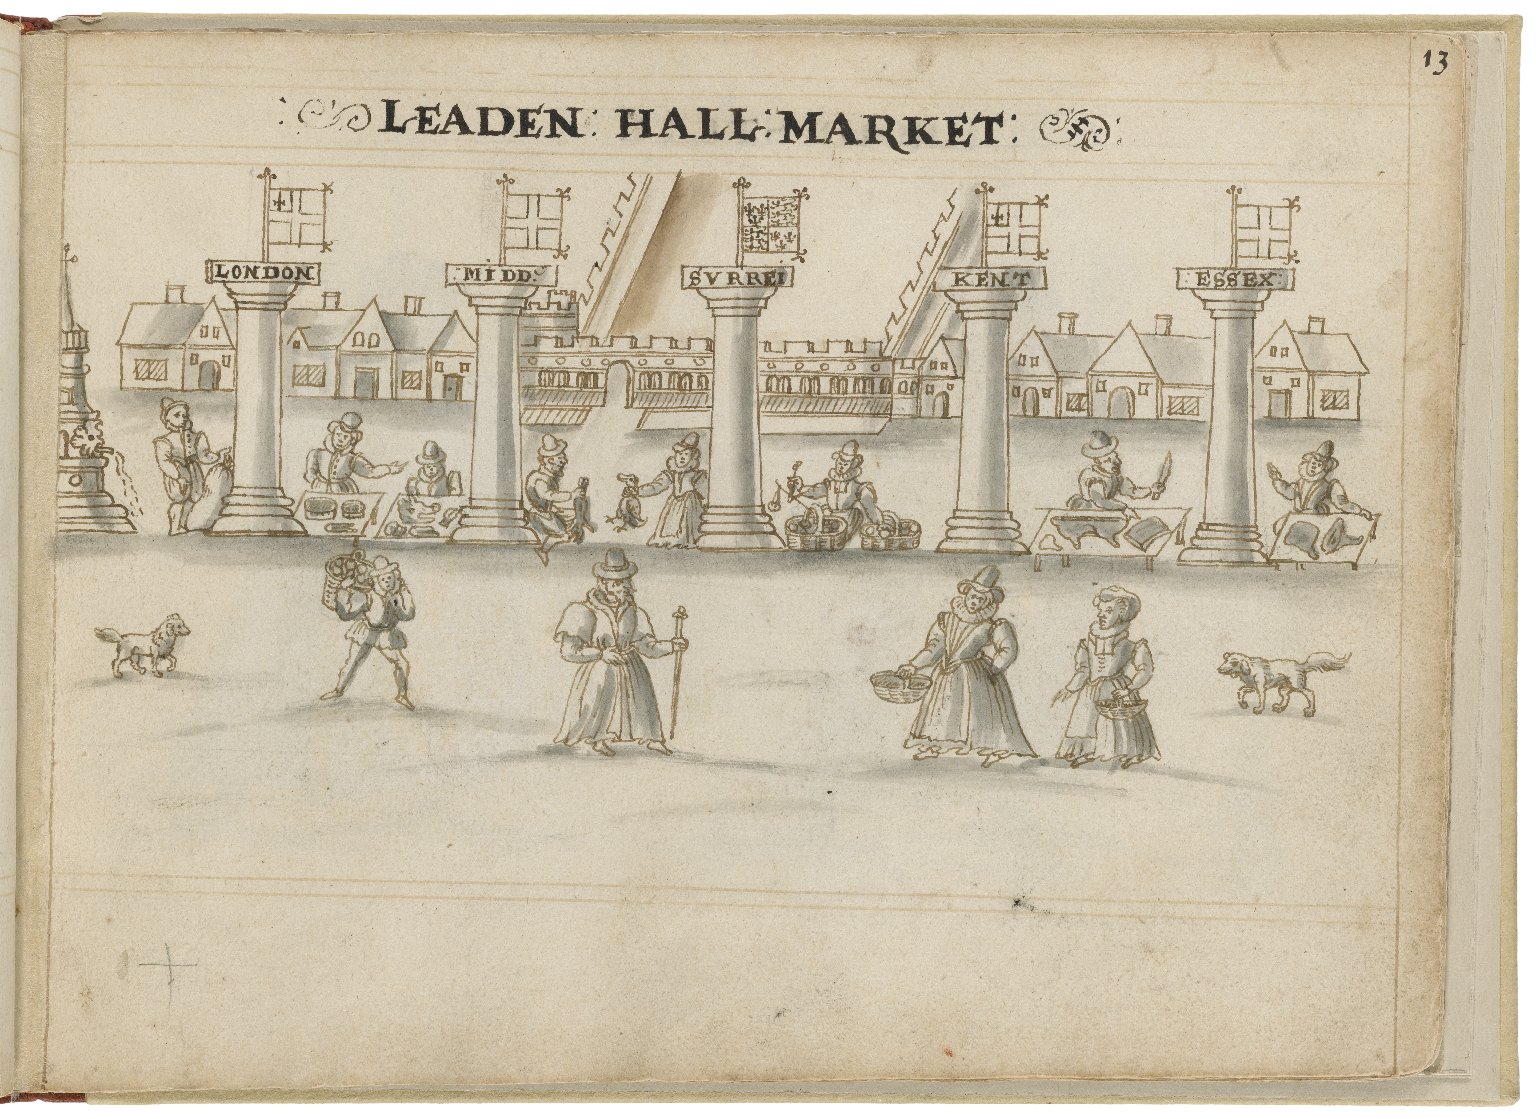 Drawing of Leadenhall by Hugh Alley. Image courtesy of the Folger Digital Image Collection.